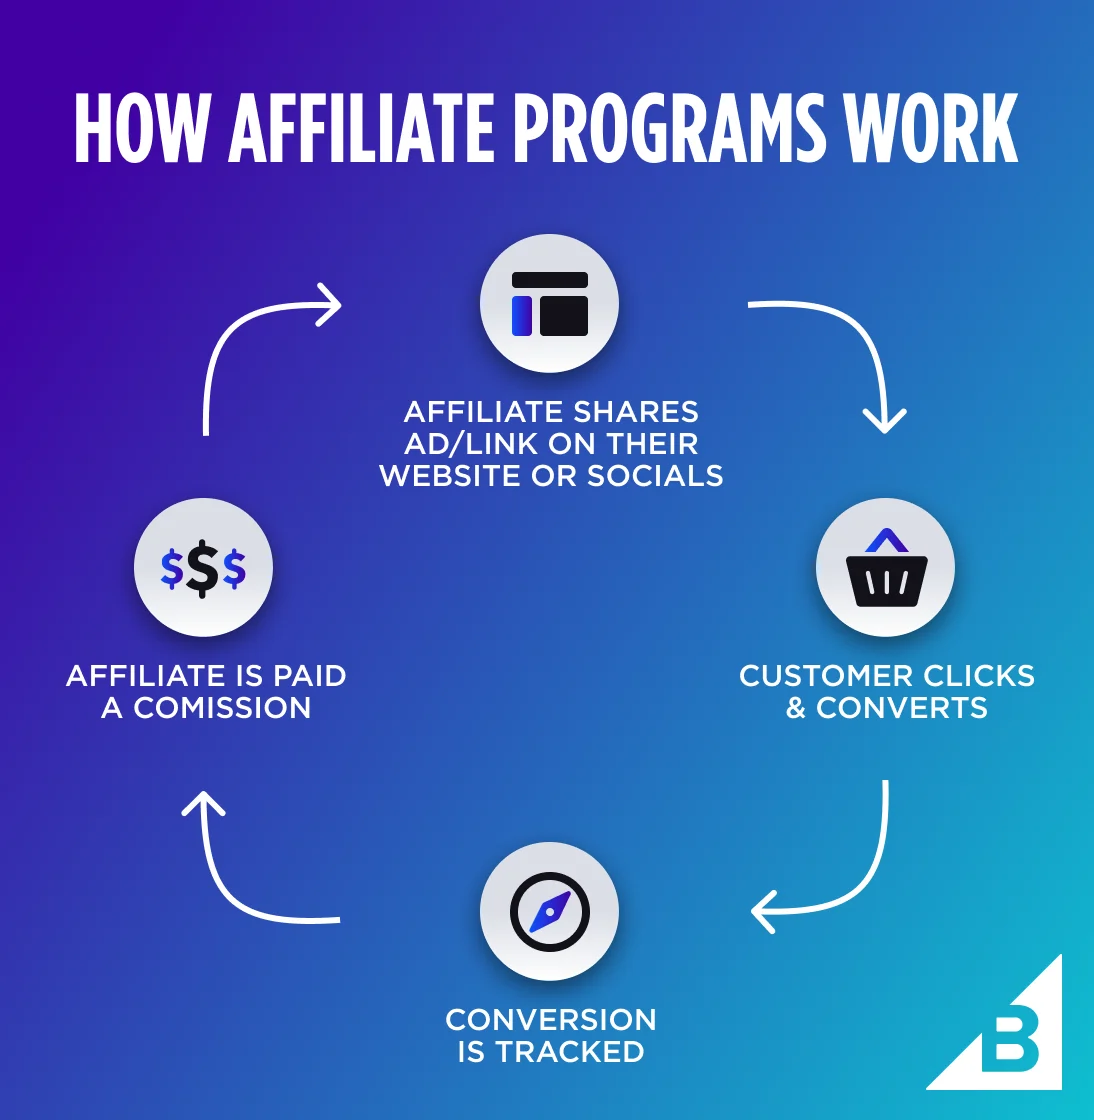 "Cryptocurrency Affiliate Marketing Programs"